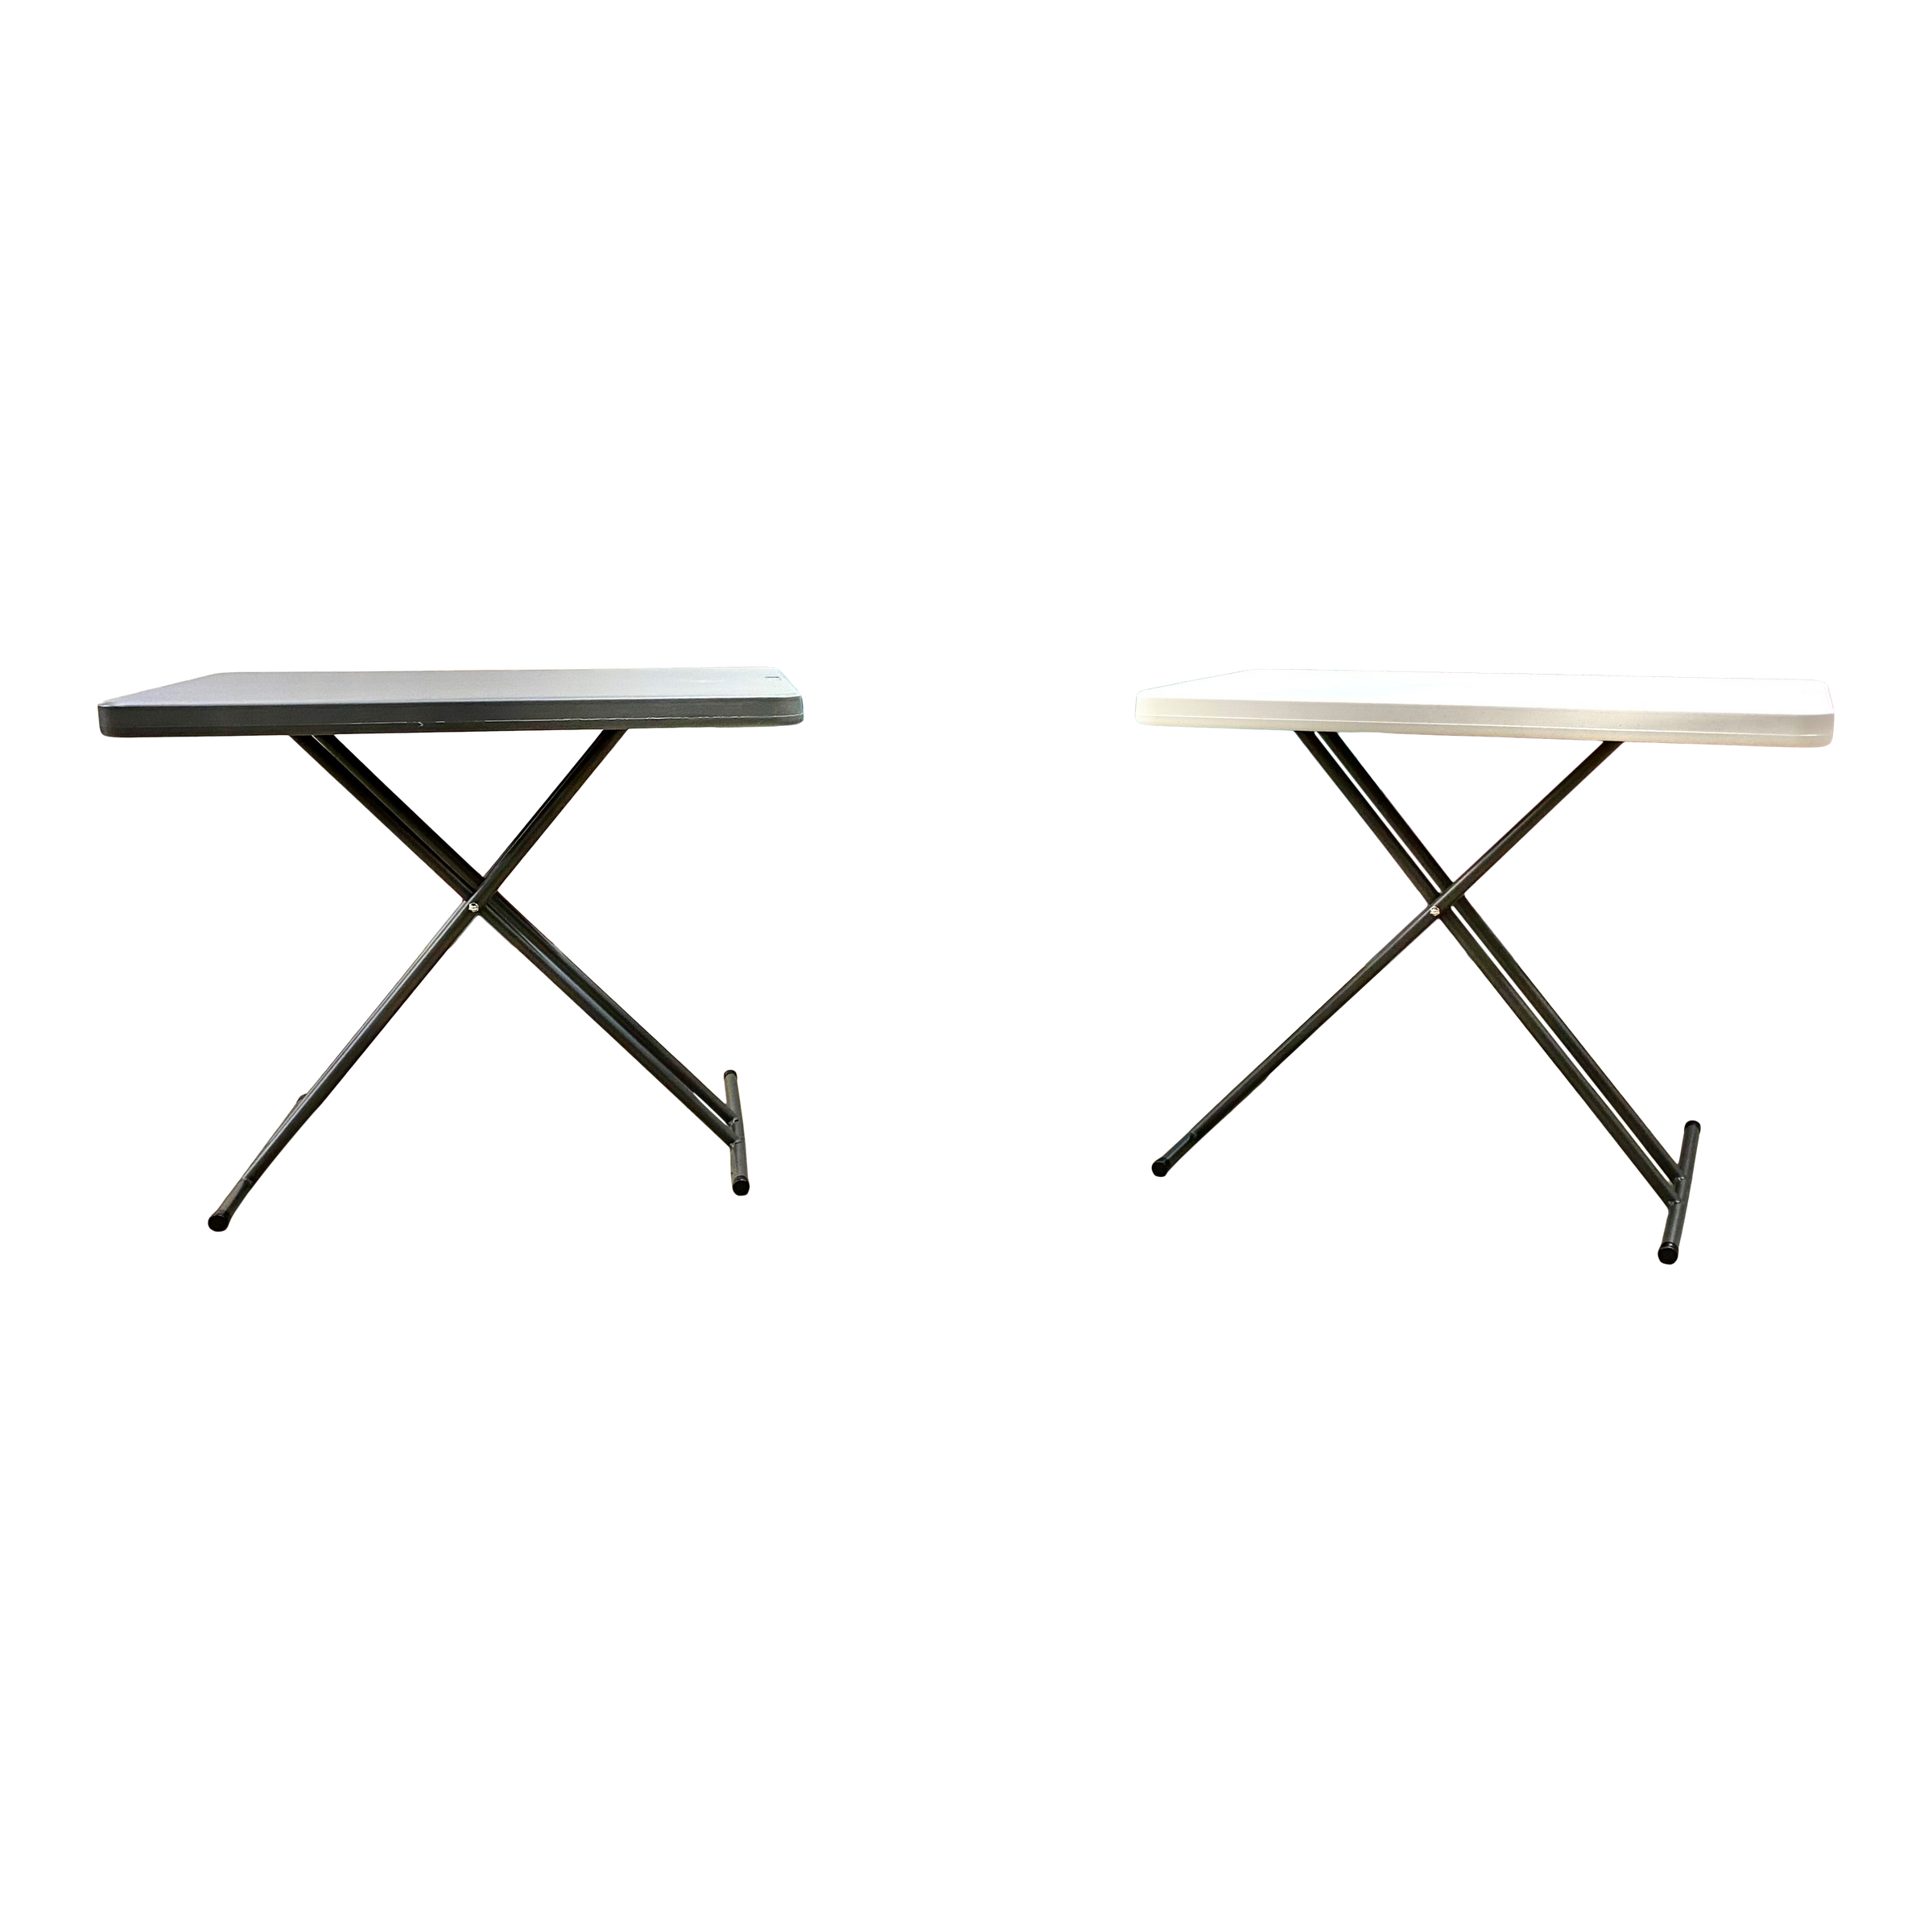 One charcoal and one platinum 30" personal folding-tables.